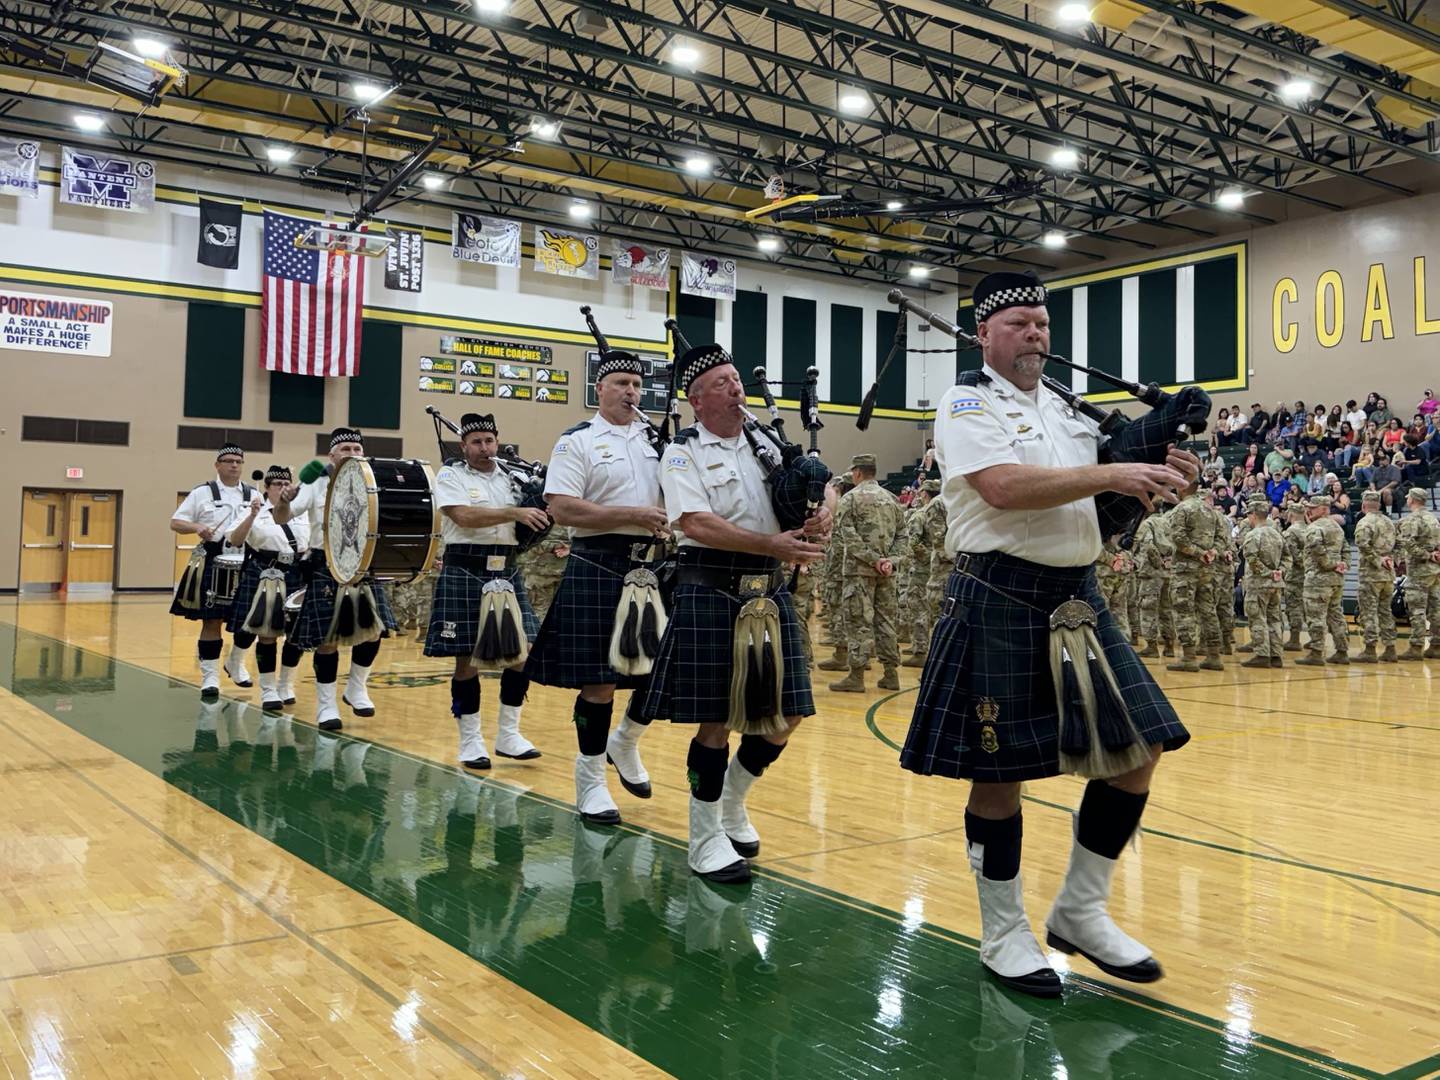 Bagpipe and Drums of the Emerald Society of the Chicago Police Department play during the deployment ceremony held in Coal City on Thursday for Bravo Company 766.